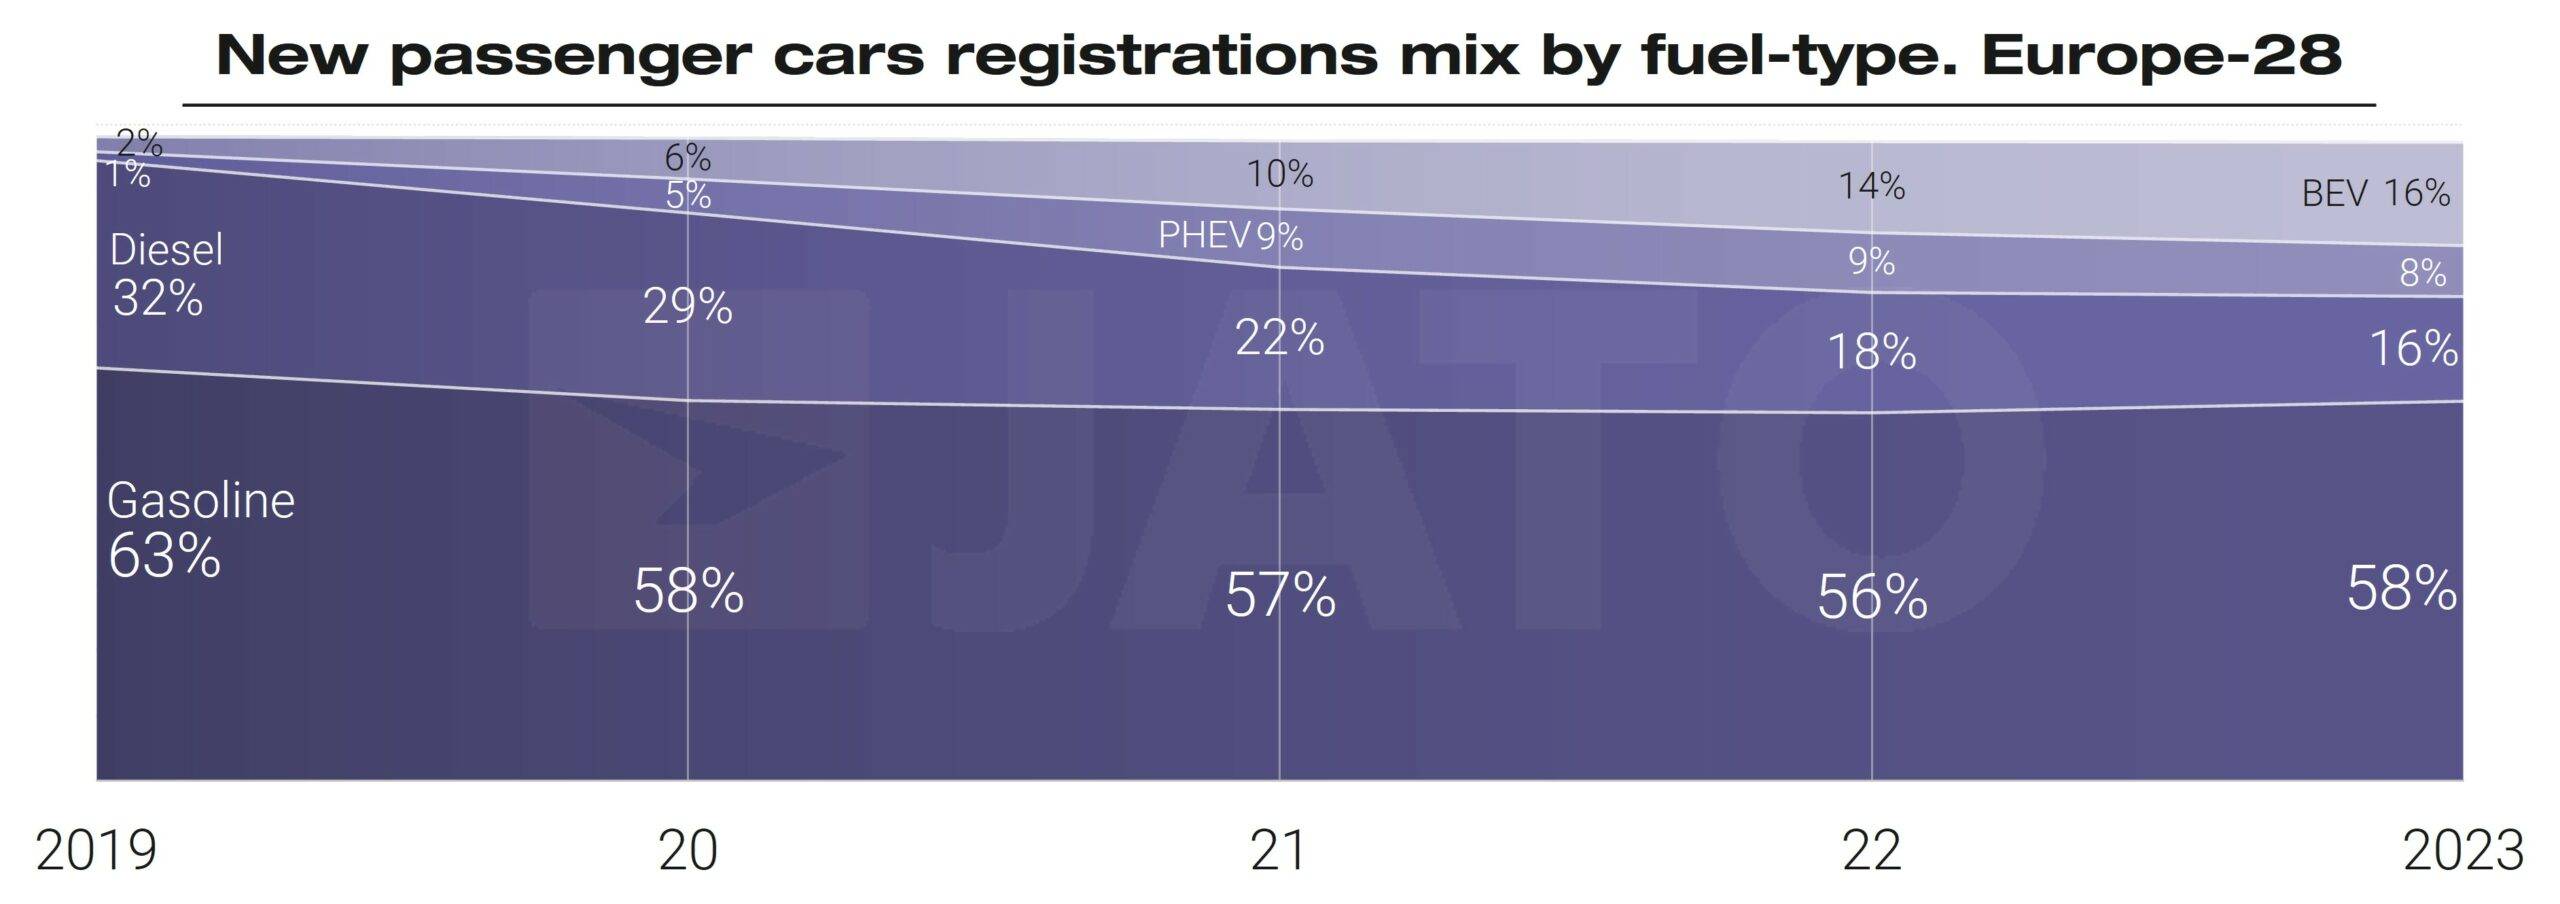 European-car-regs-2023-by-fuel-type-scaled